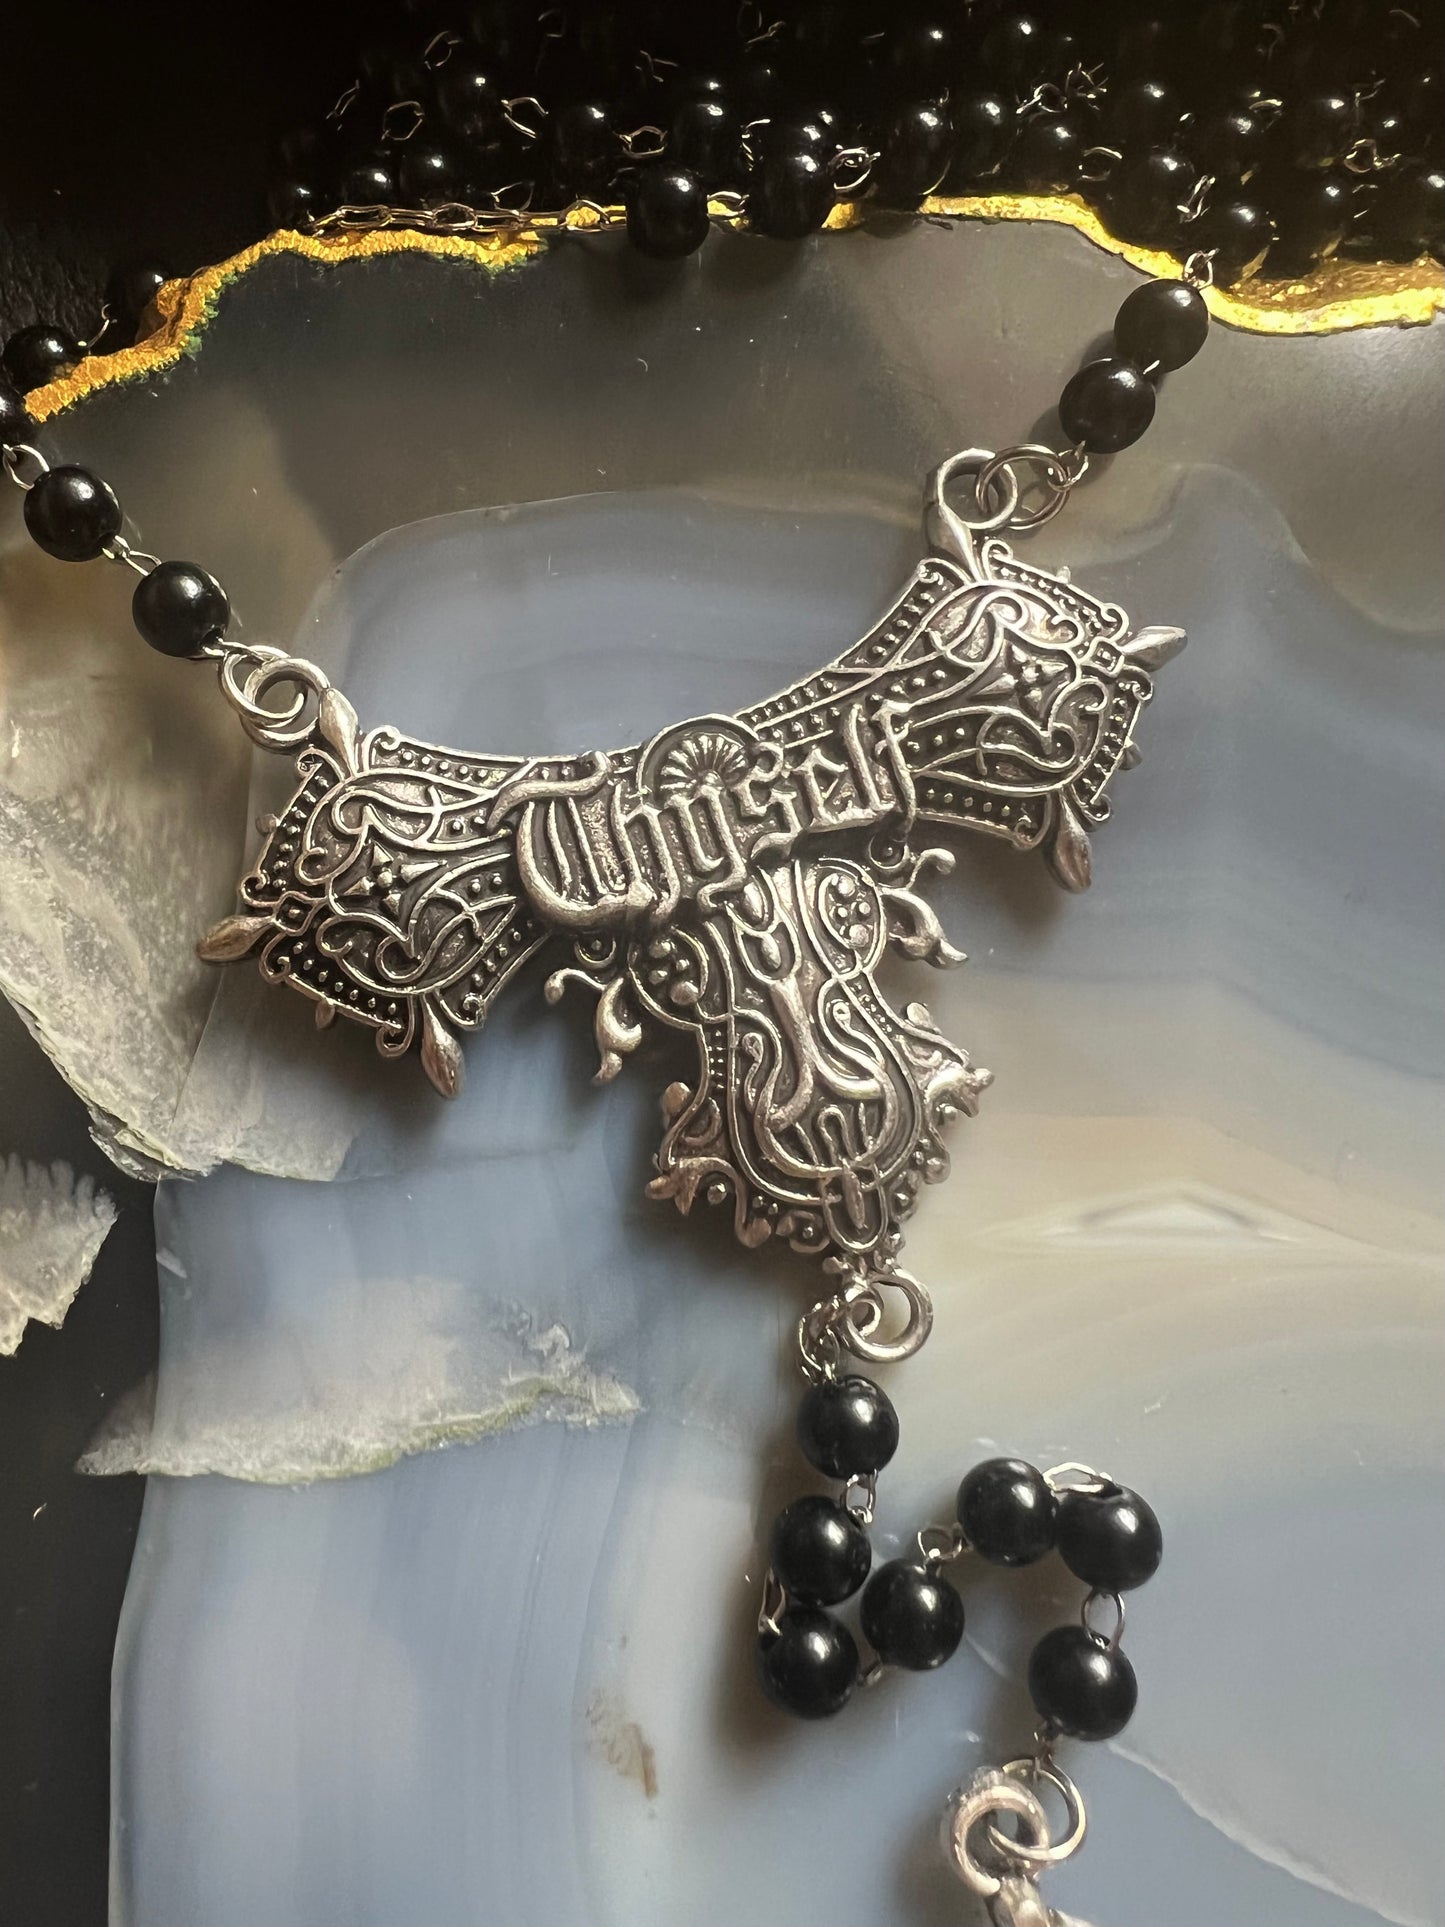 THYSELF - unholy rosary chain - mother of hades cast necklace